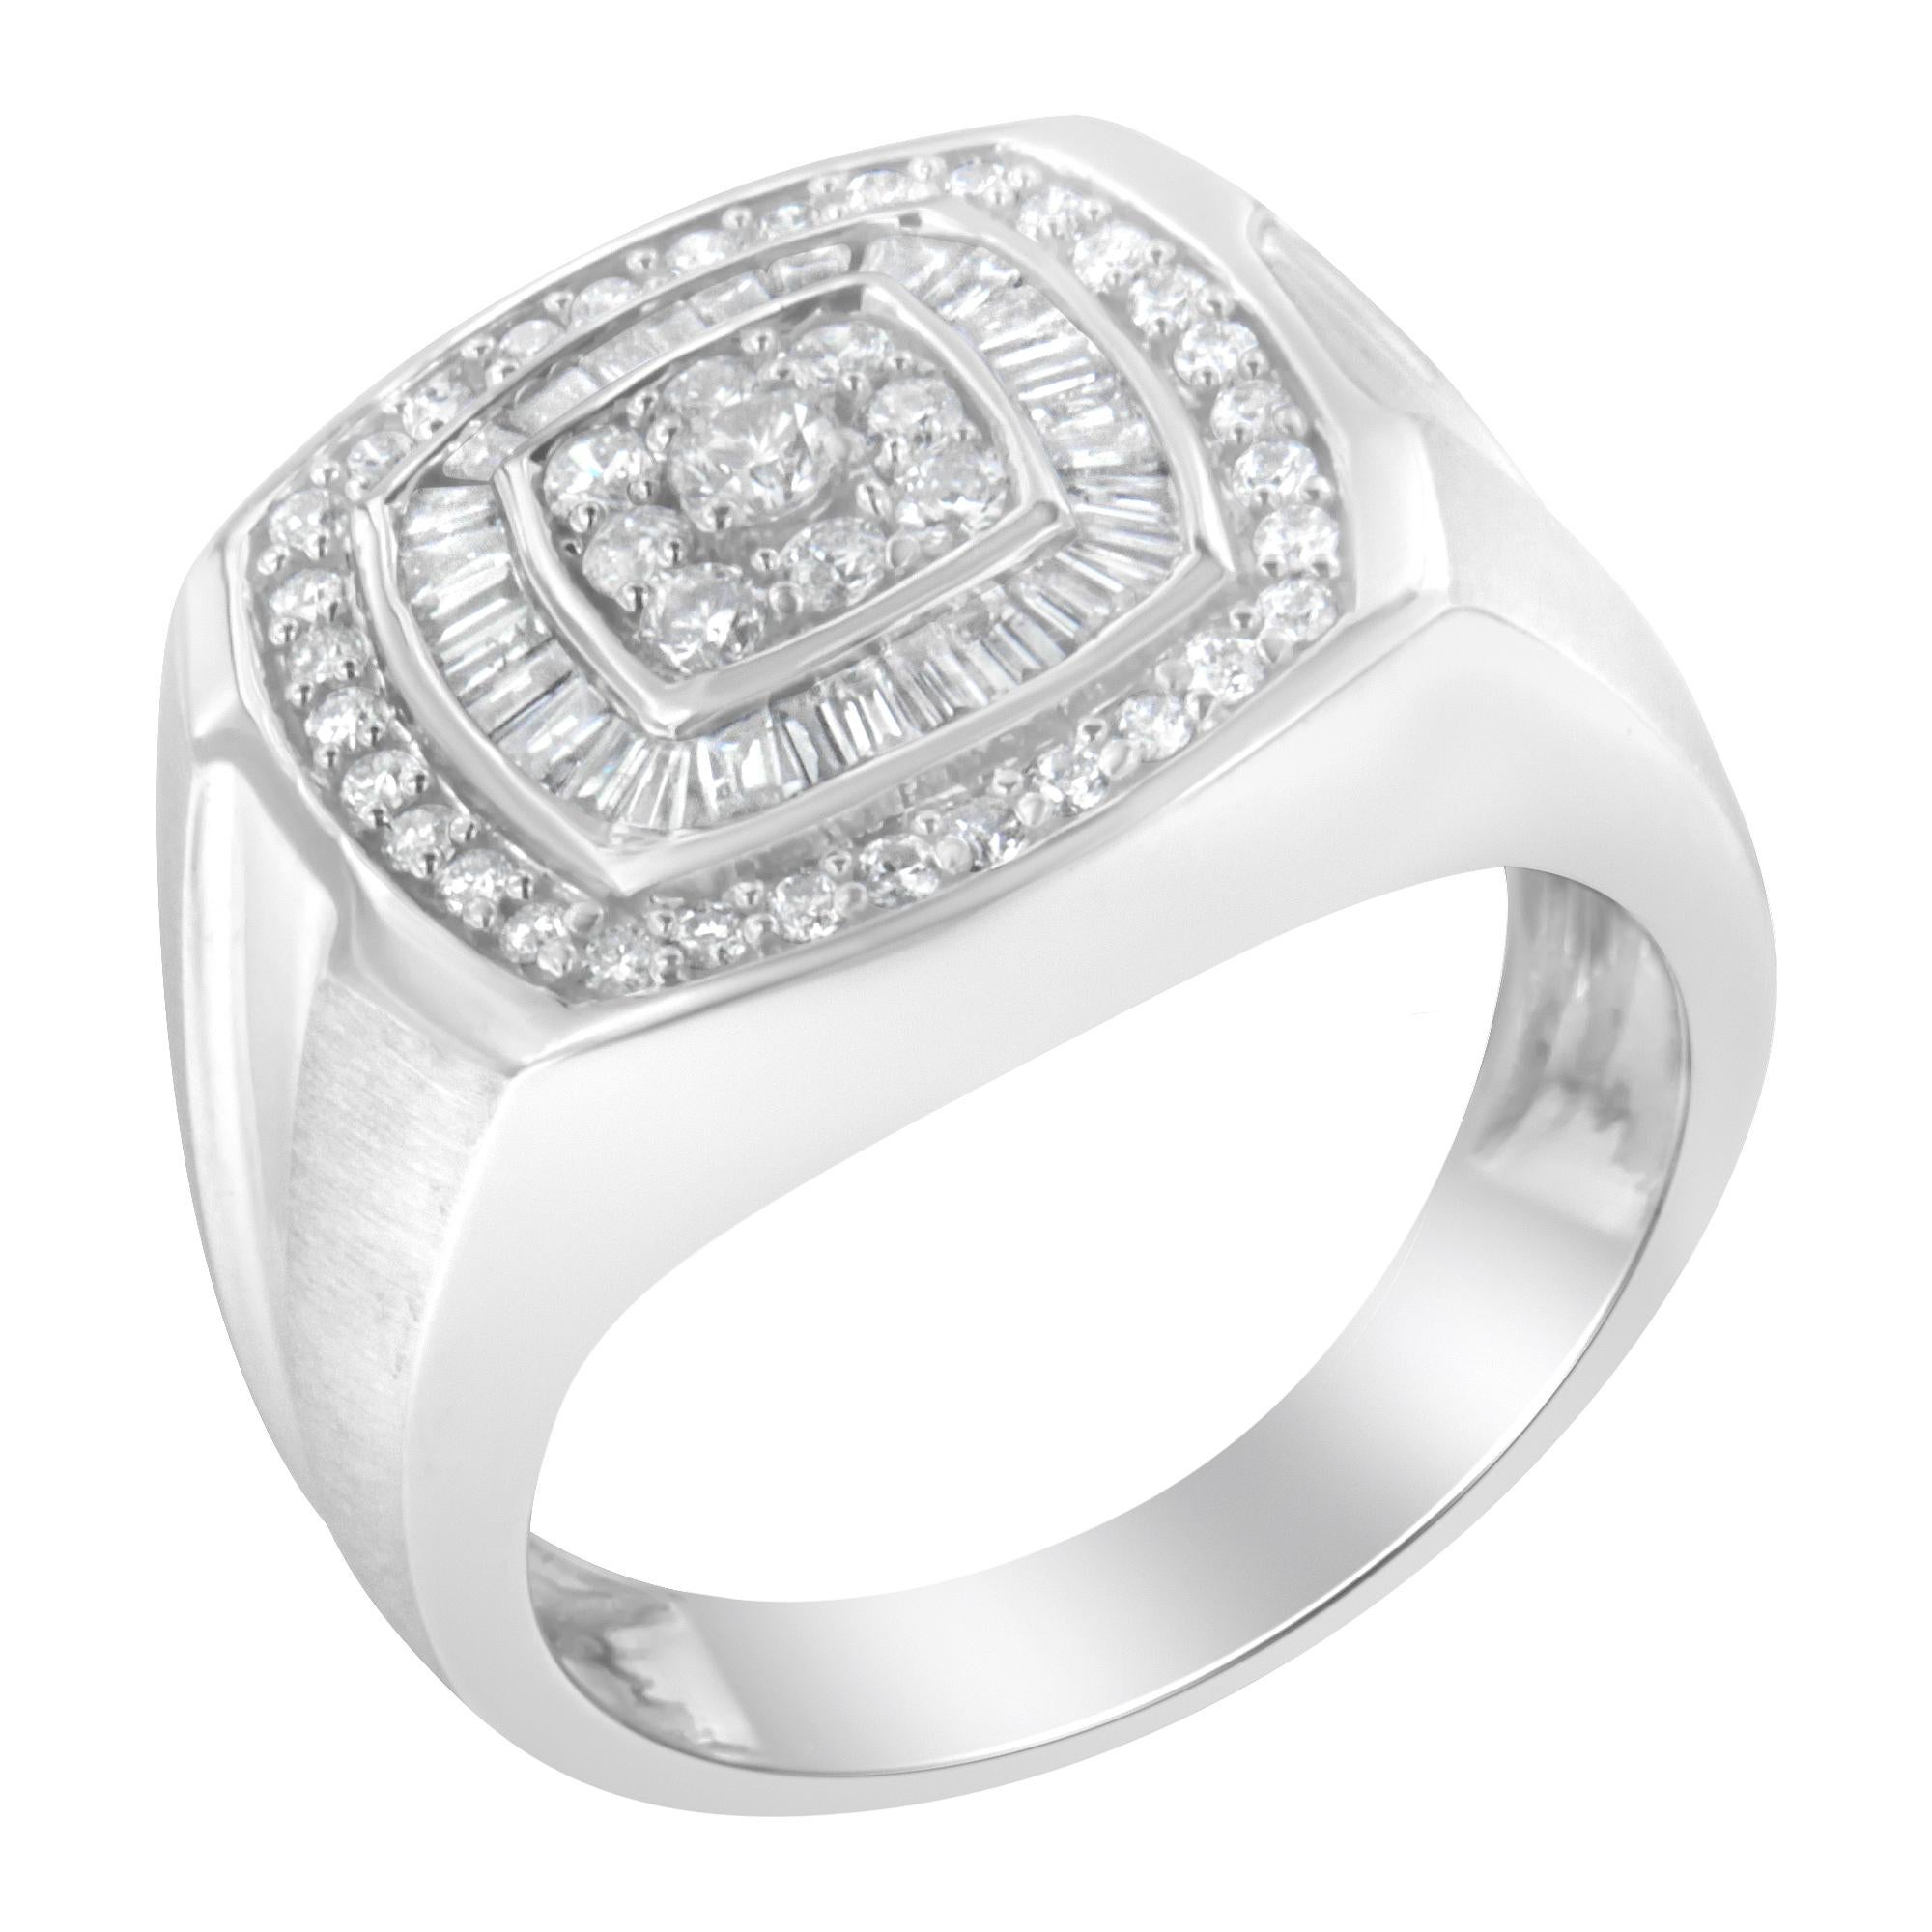 Vividly created from 14-karat white gold, this men's diamond band is stylish and classic. The top of the elegant ring features a rounded square design. The center flaunts nine round cut diamonds that are prong set into the square pattern. Further,